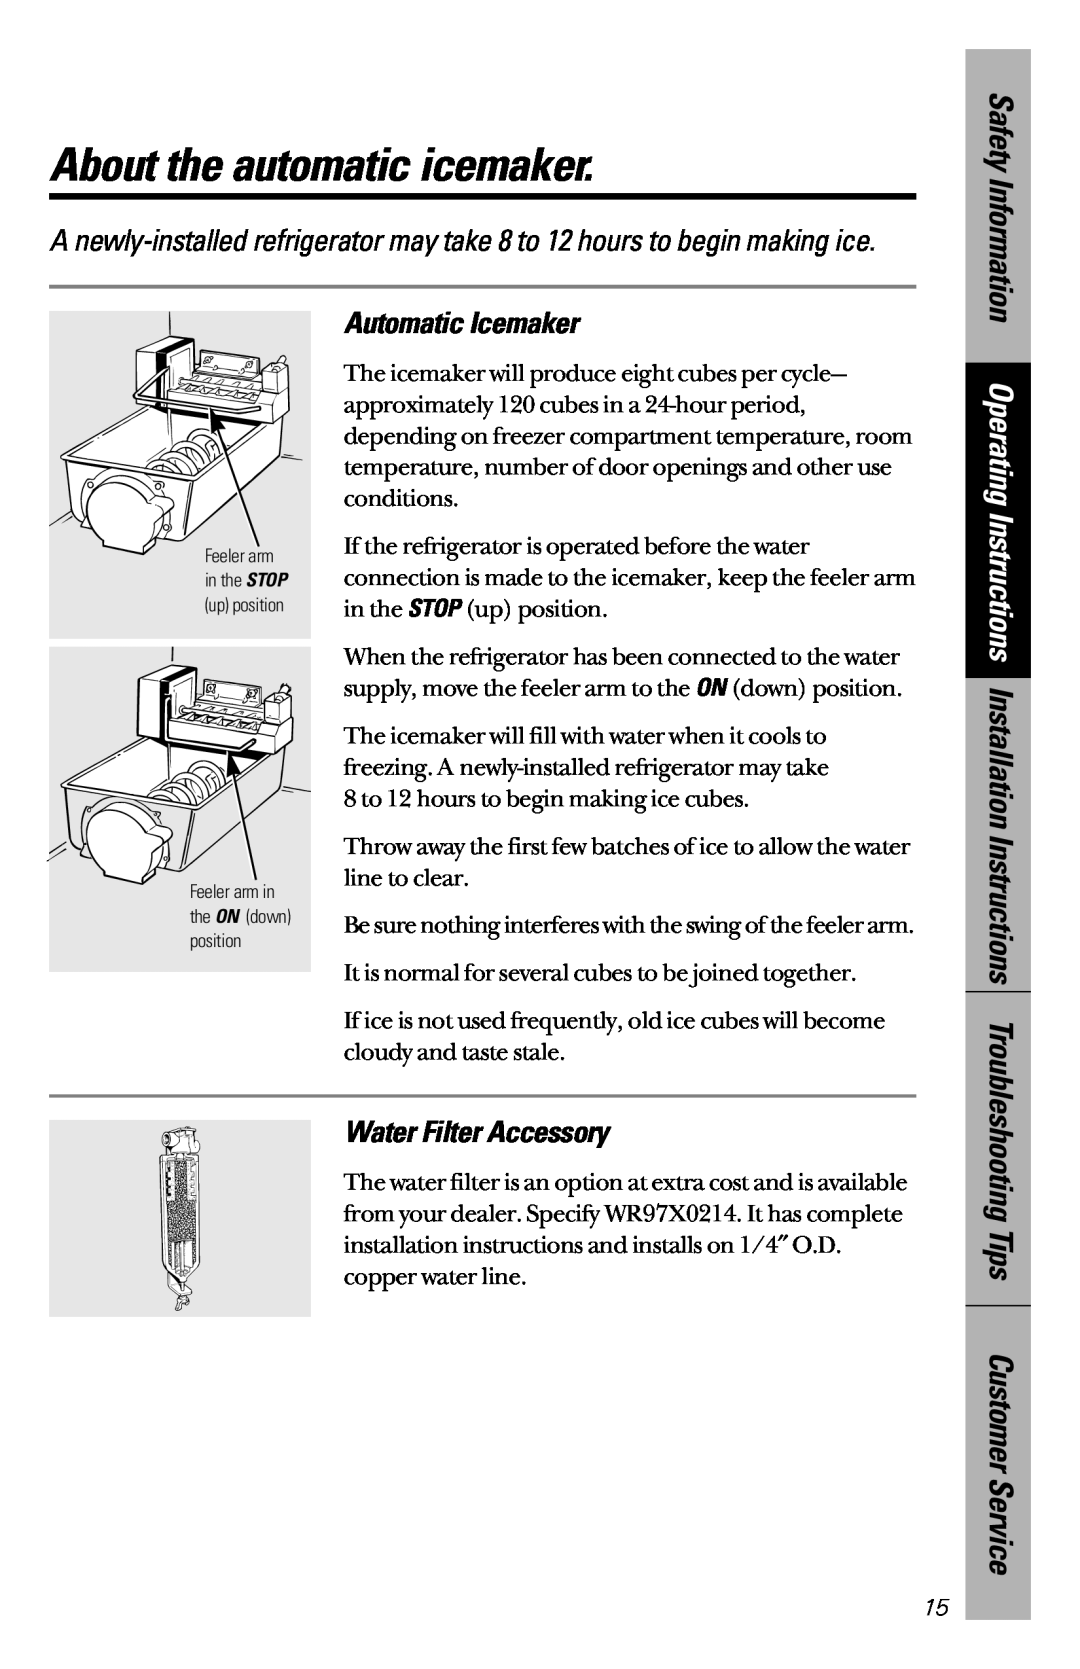 GE 28, 30 owner manual About the automatic icemaker, Tips Customer Service, Automatic Icemaker, Water Filter Accessory 